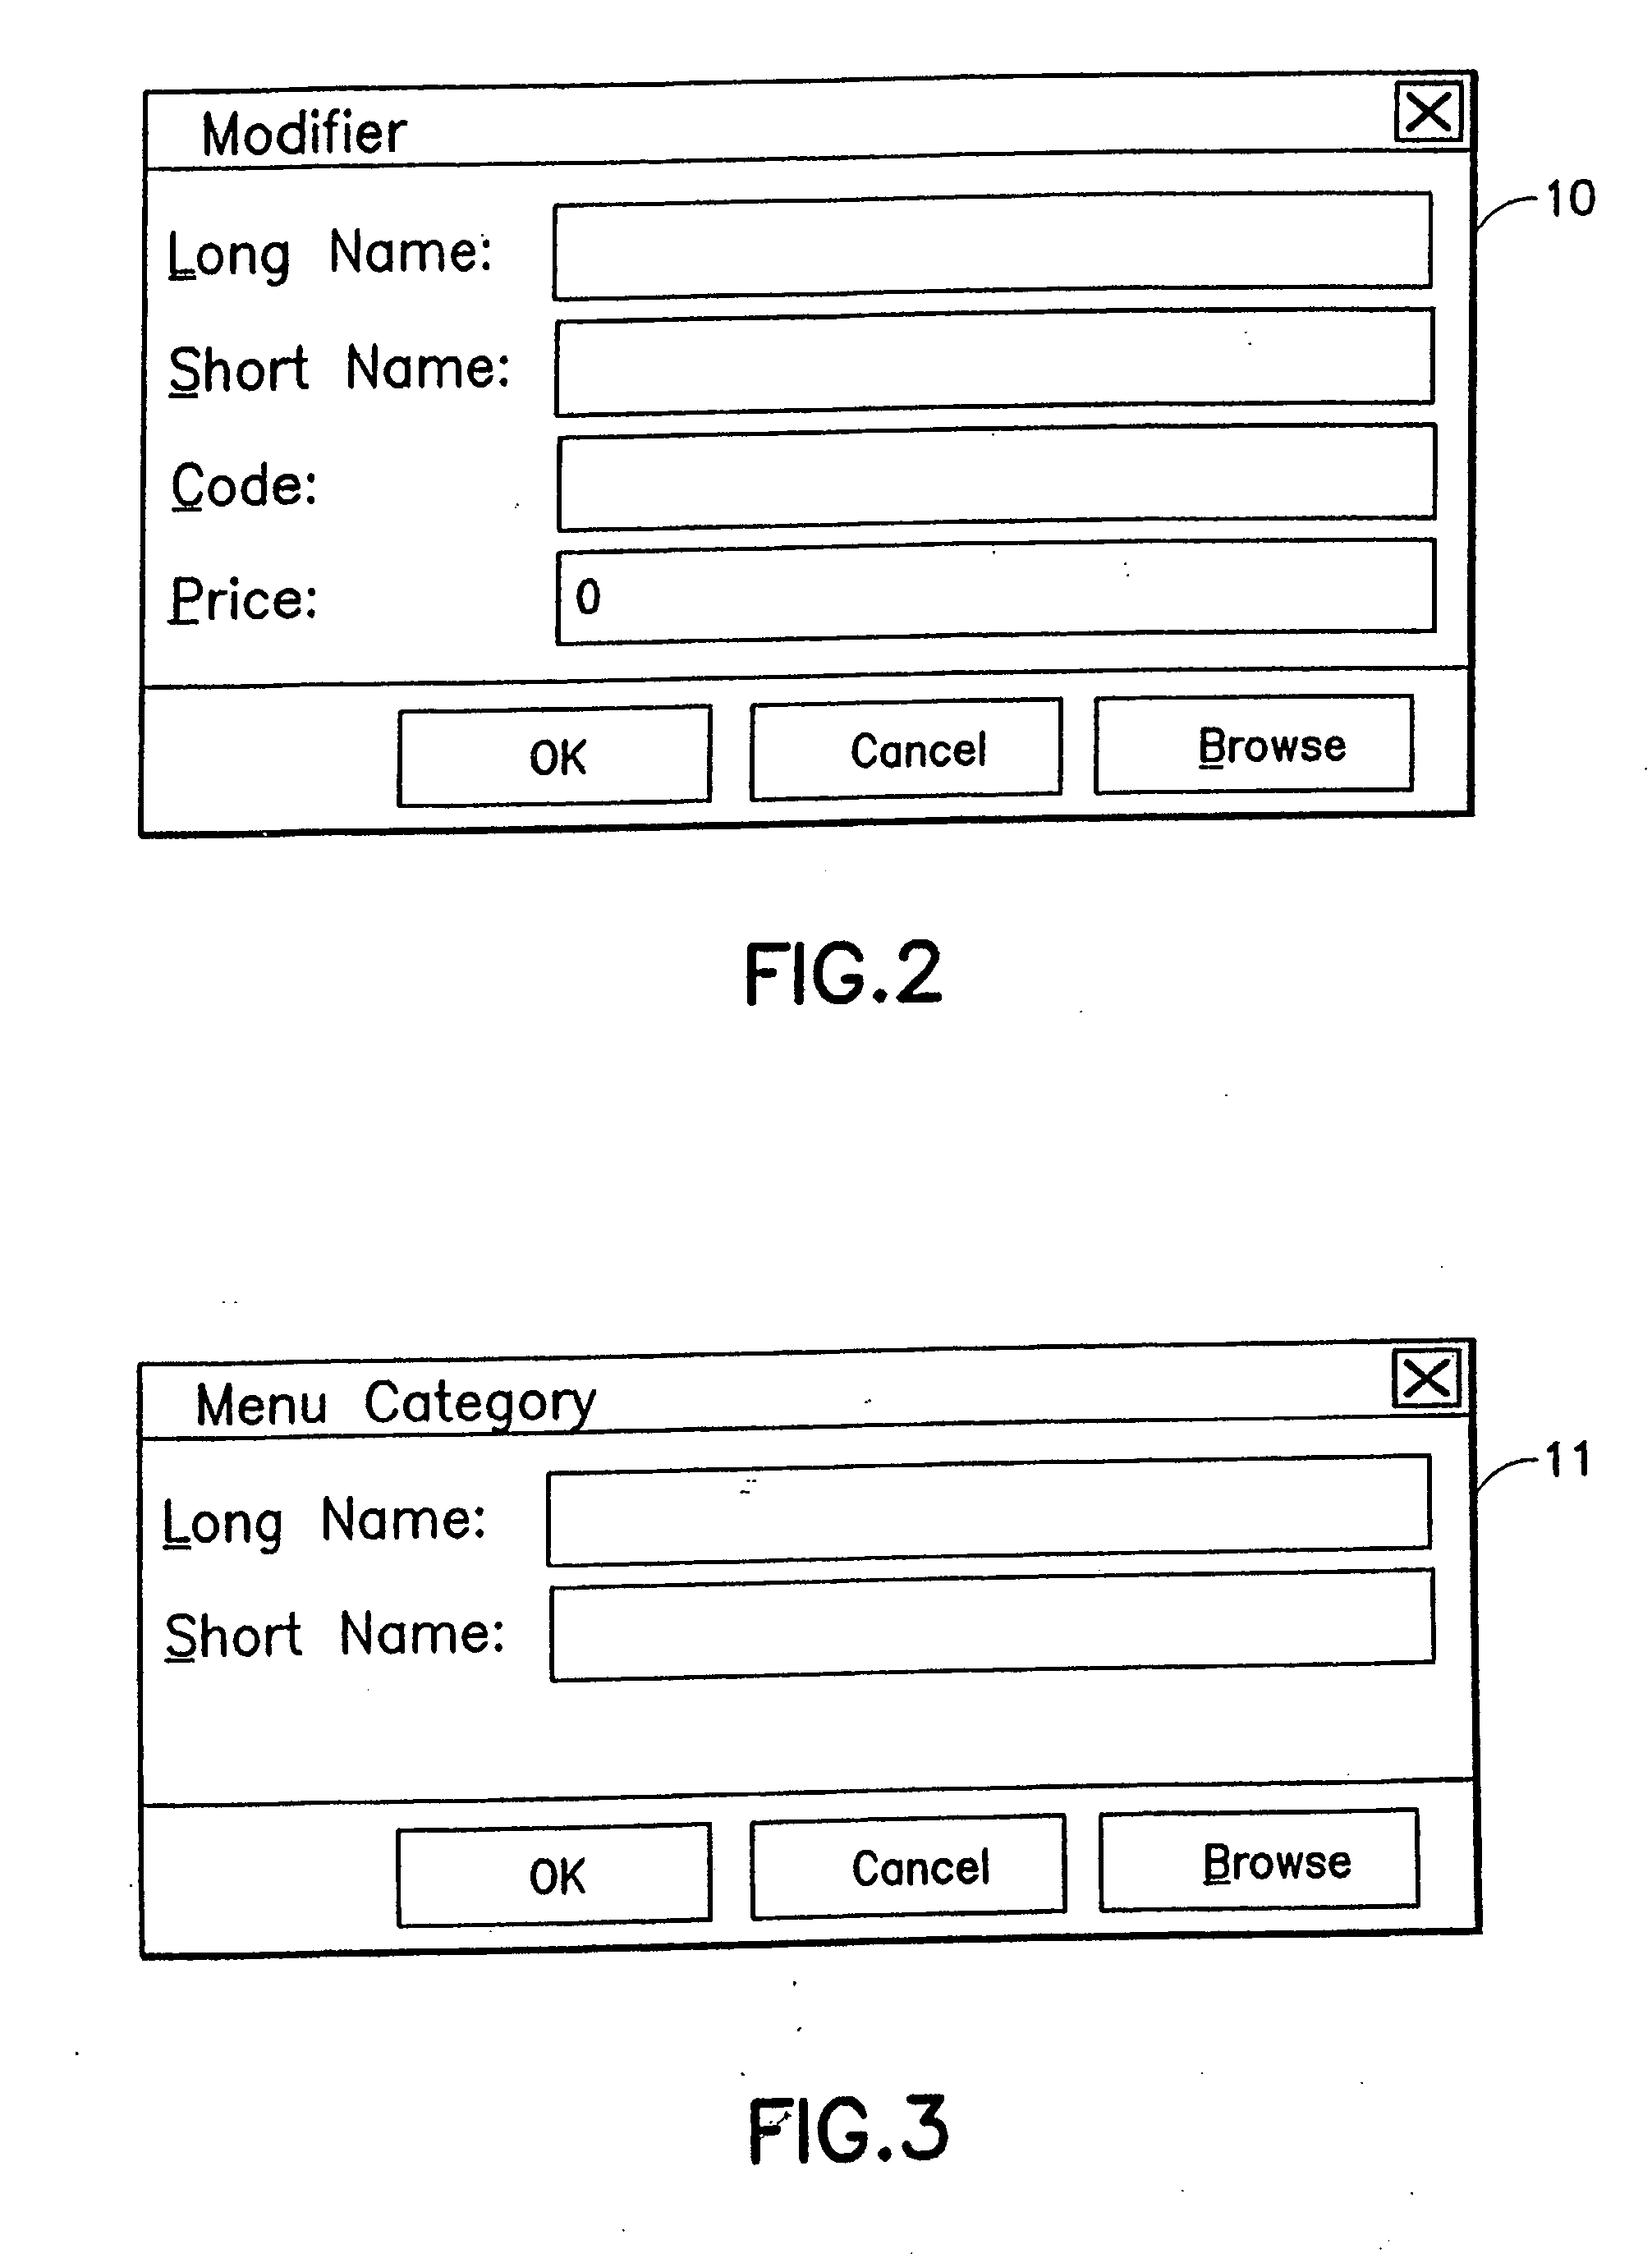 Information management and synchronous communications system